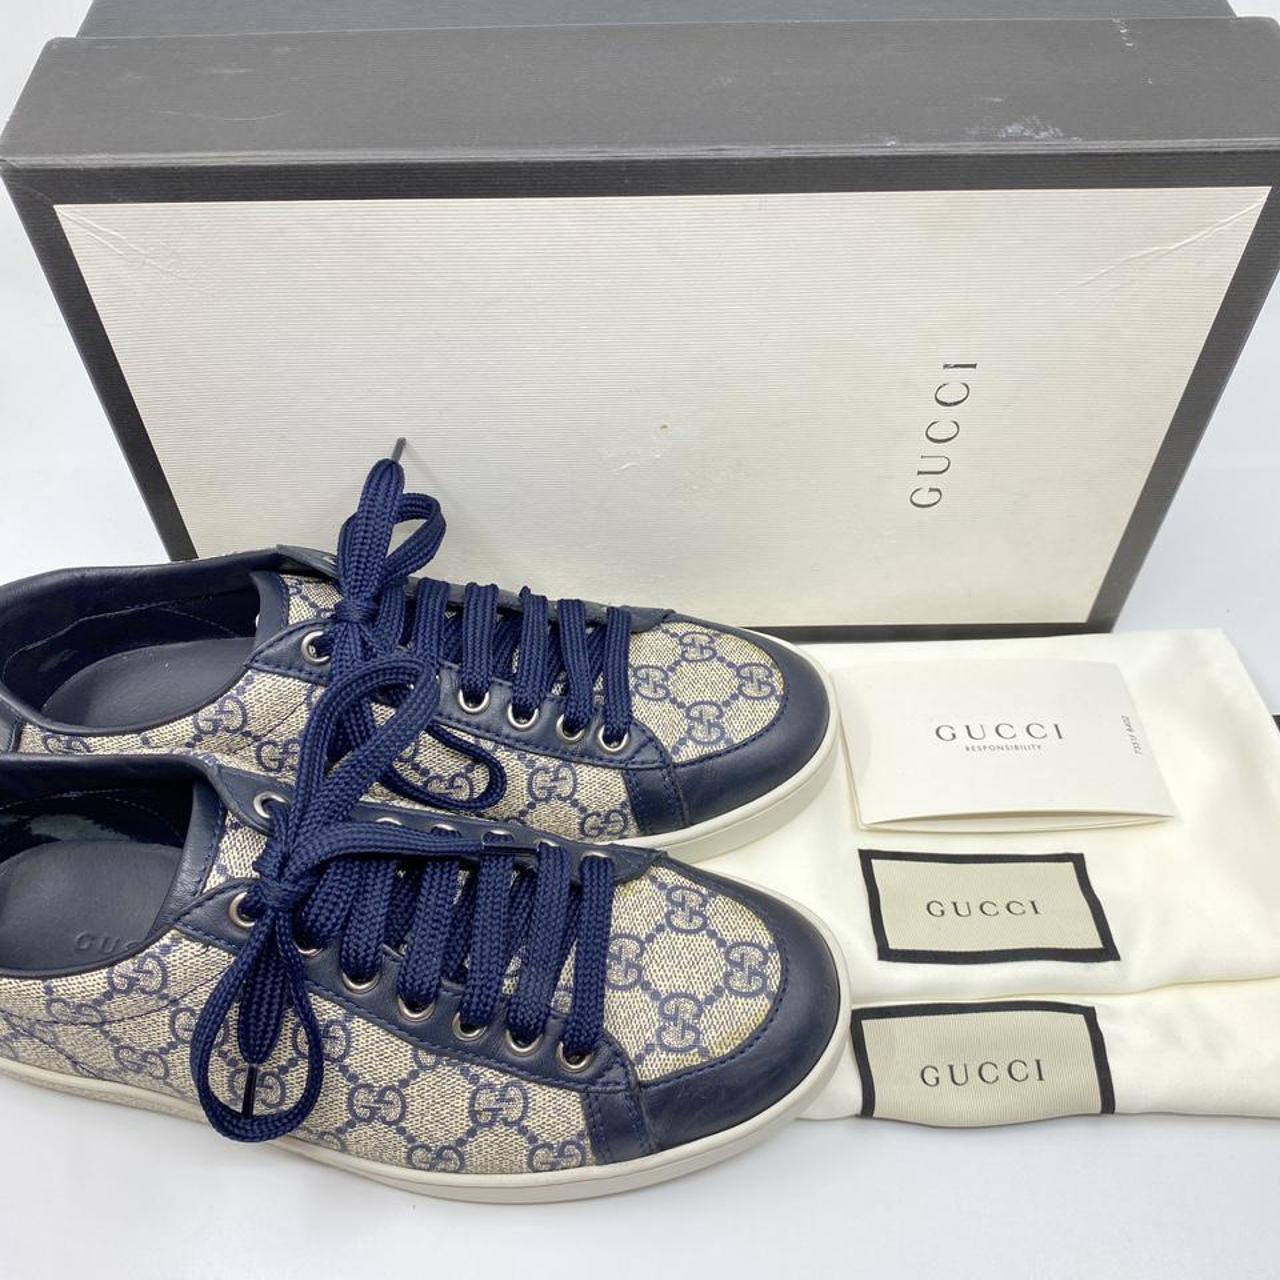 Gucci Women's Cream and Navy Trainers (2)